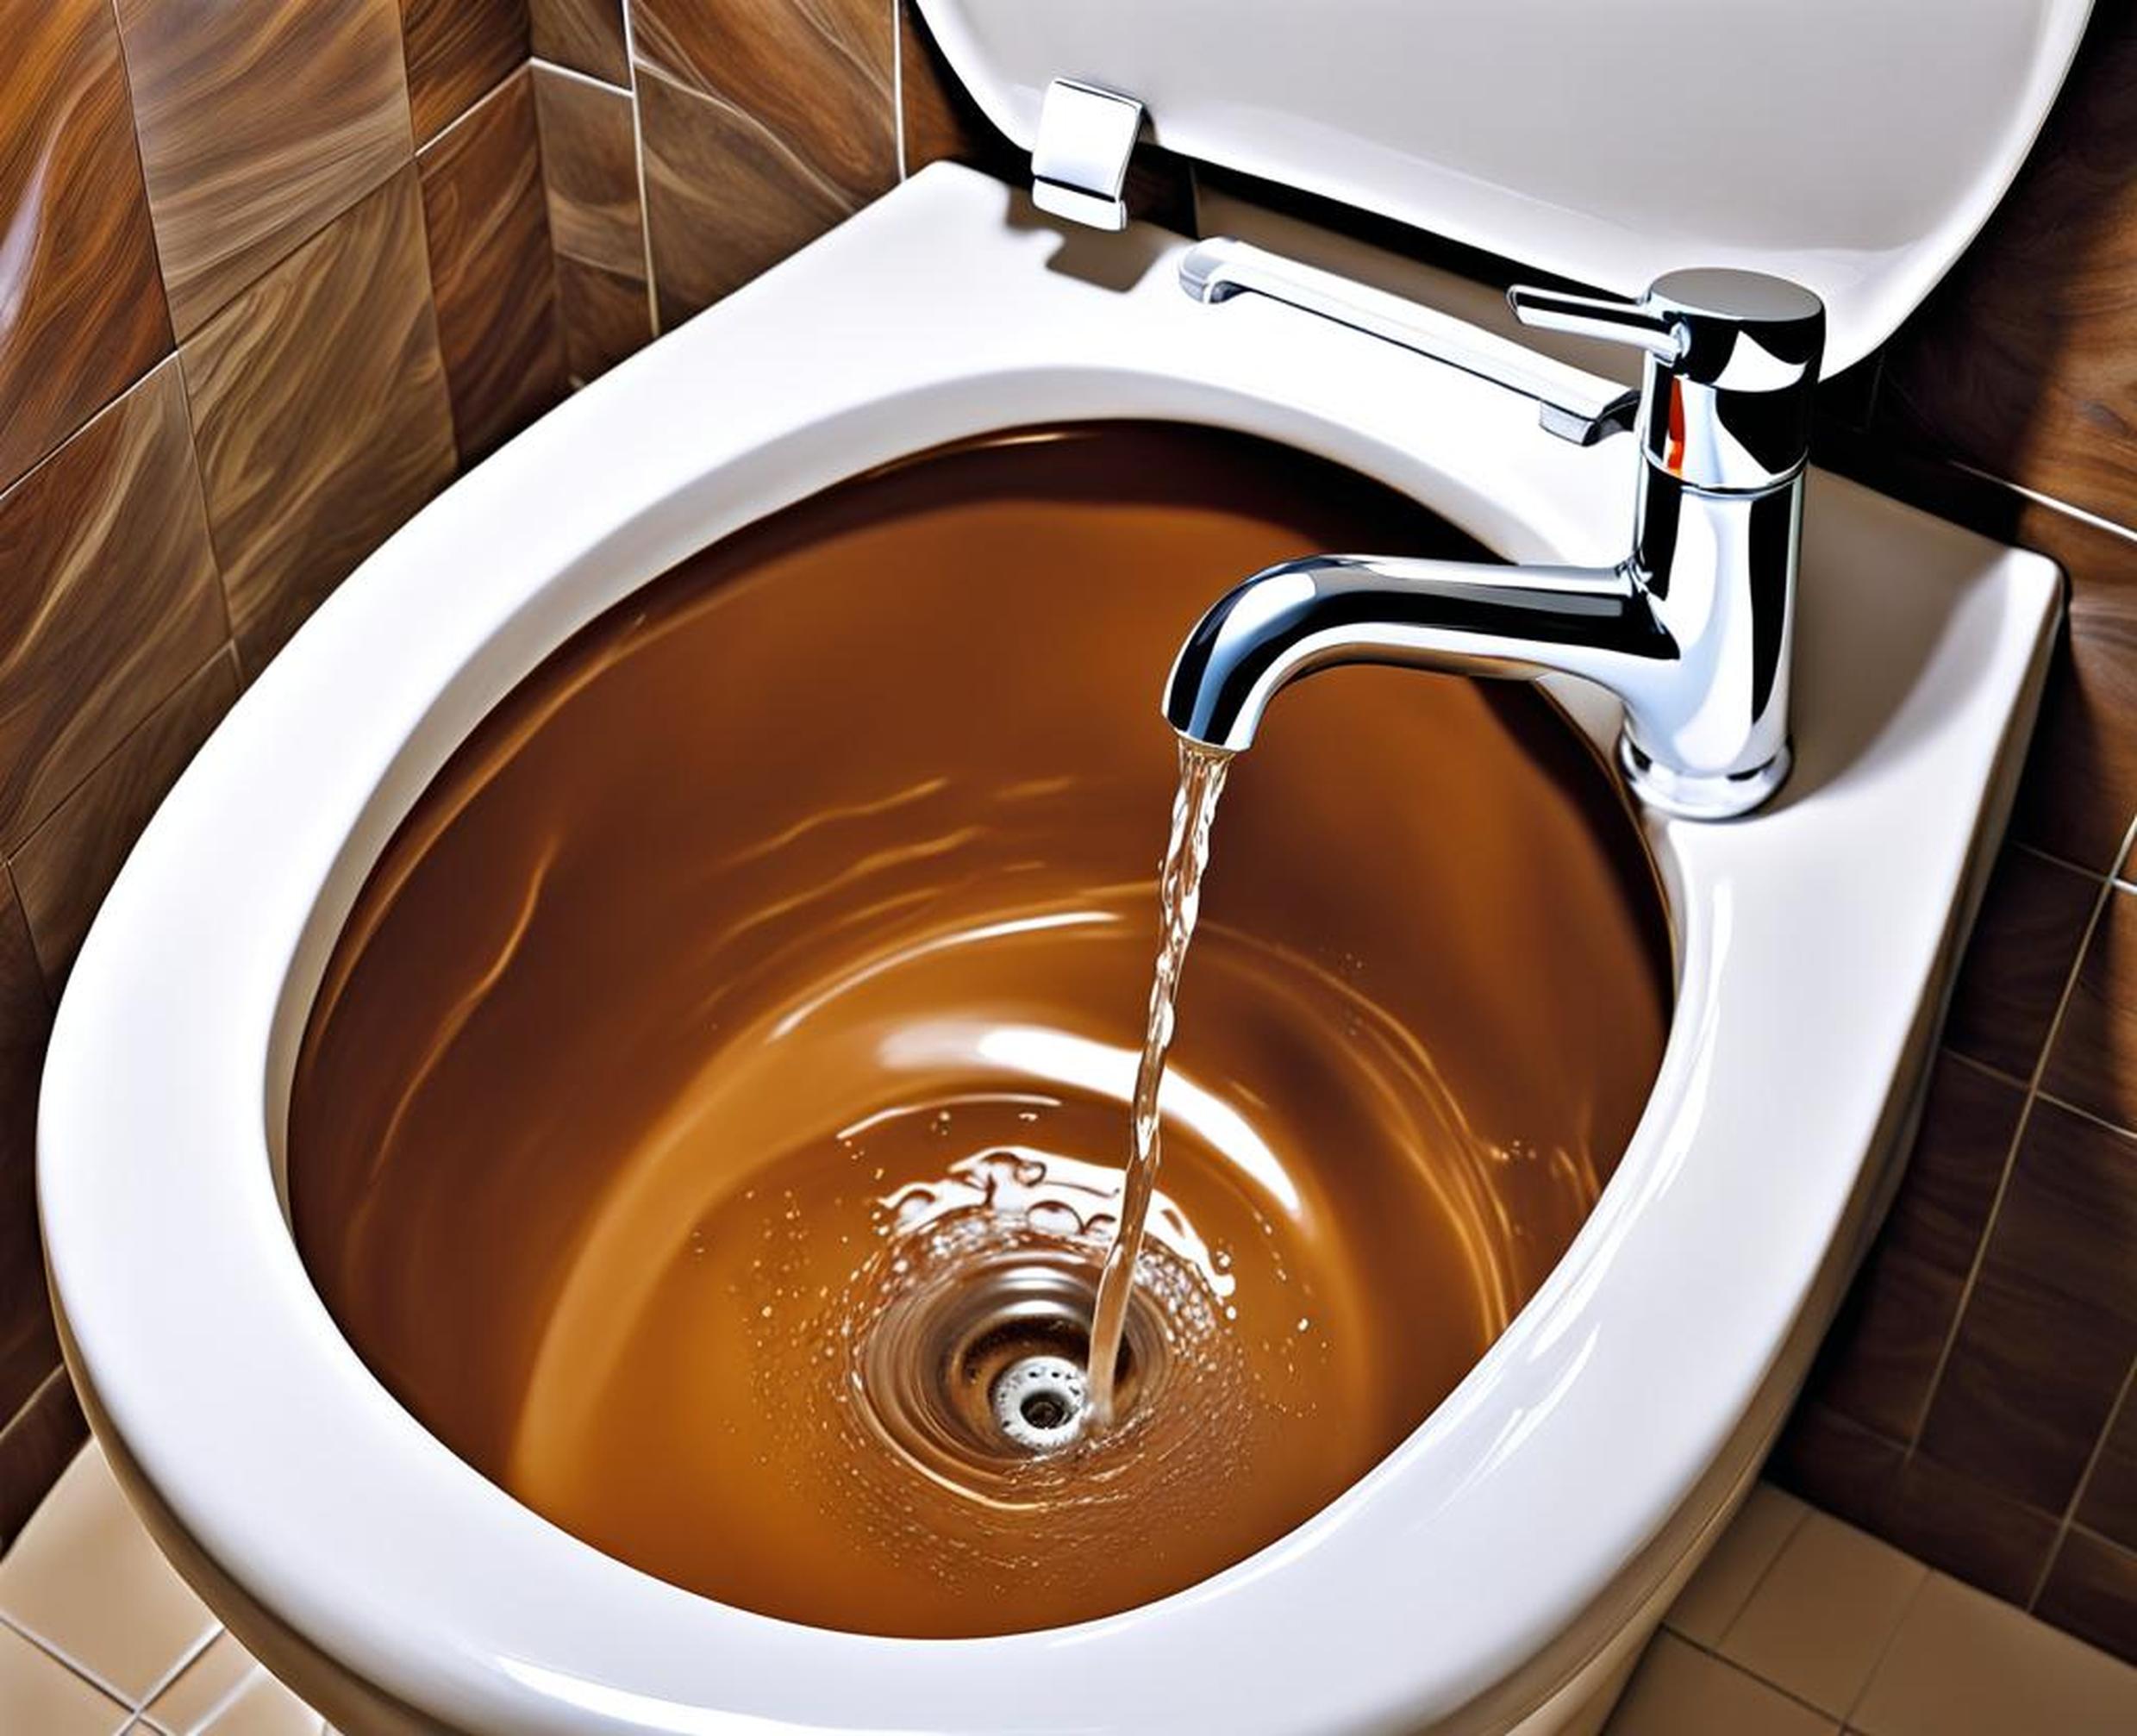 brown water coming out of faucet and toilet